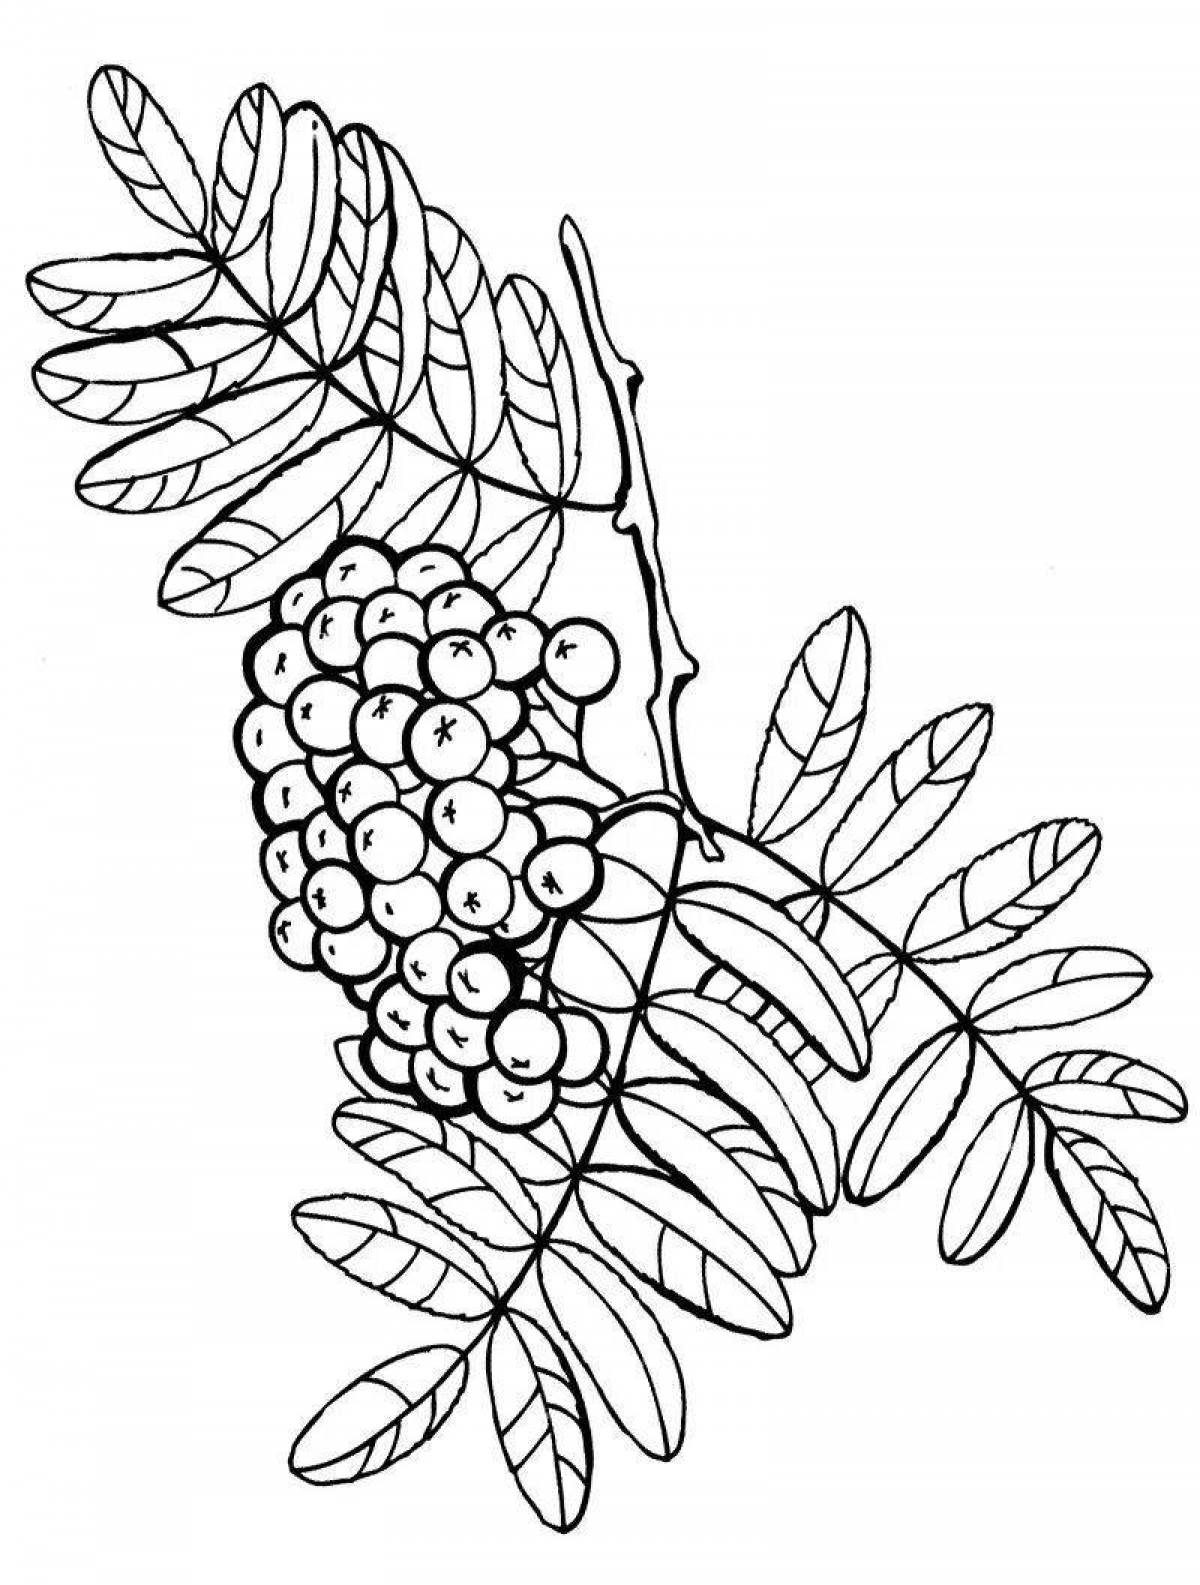 Charming sea buckthorn coloring page